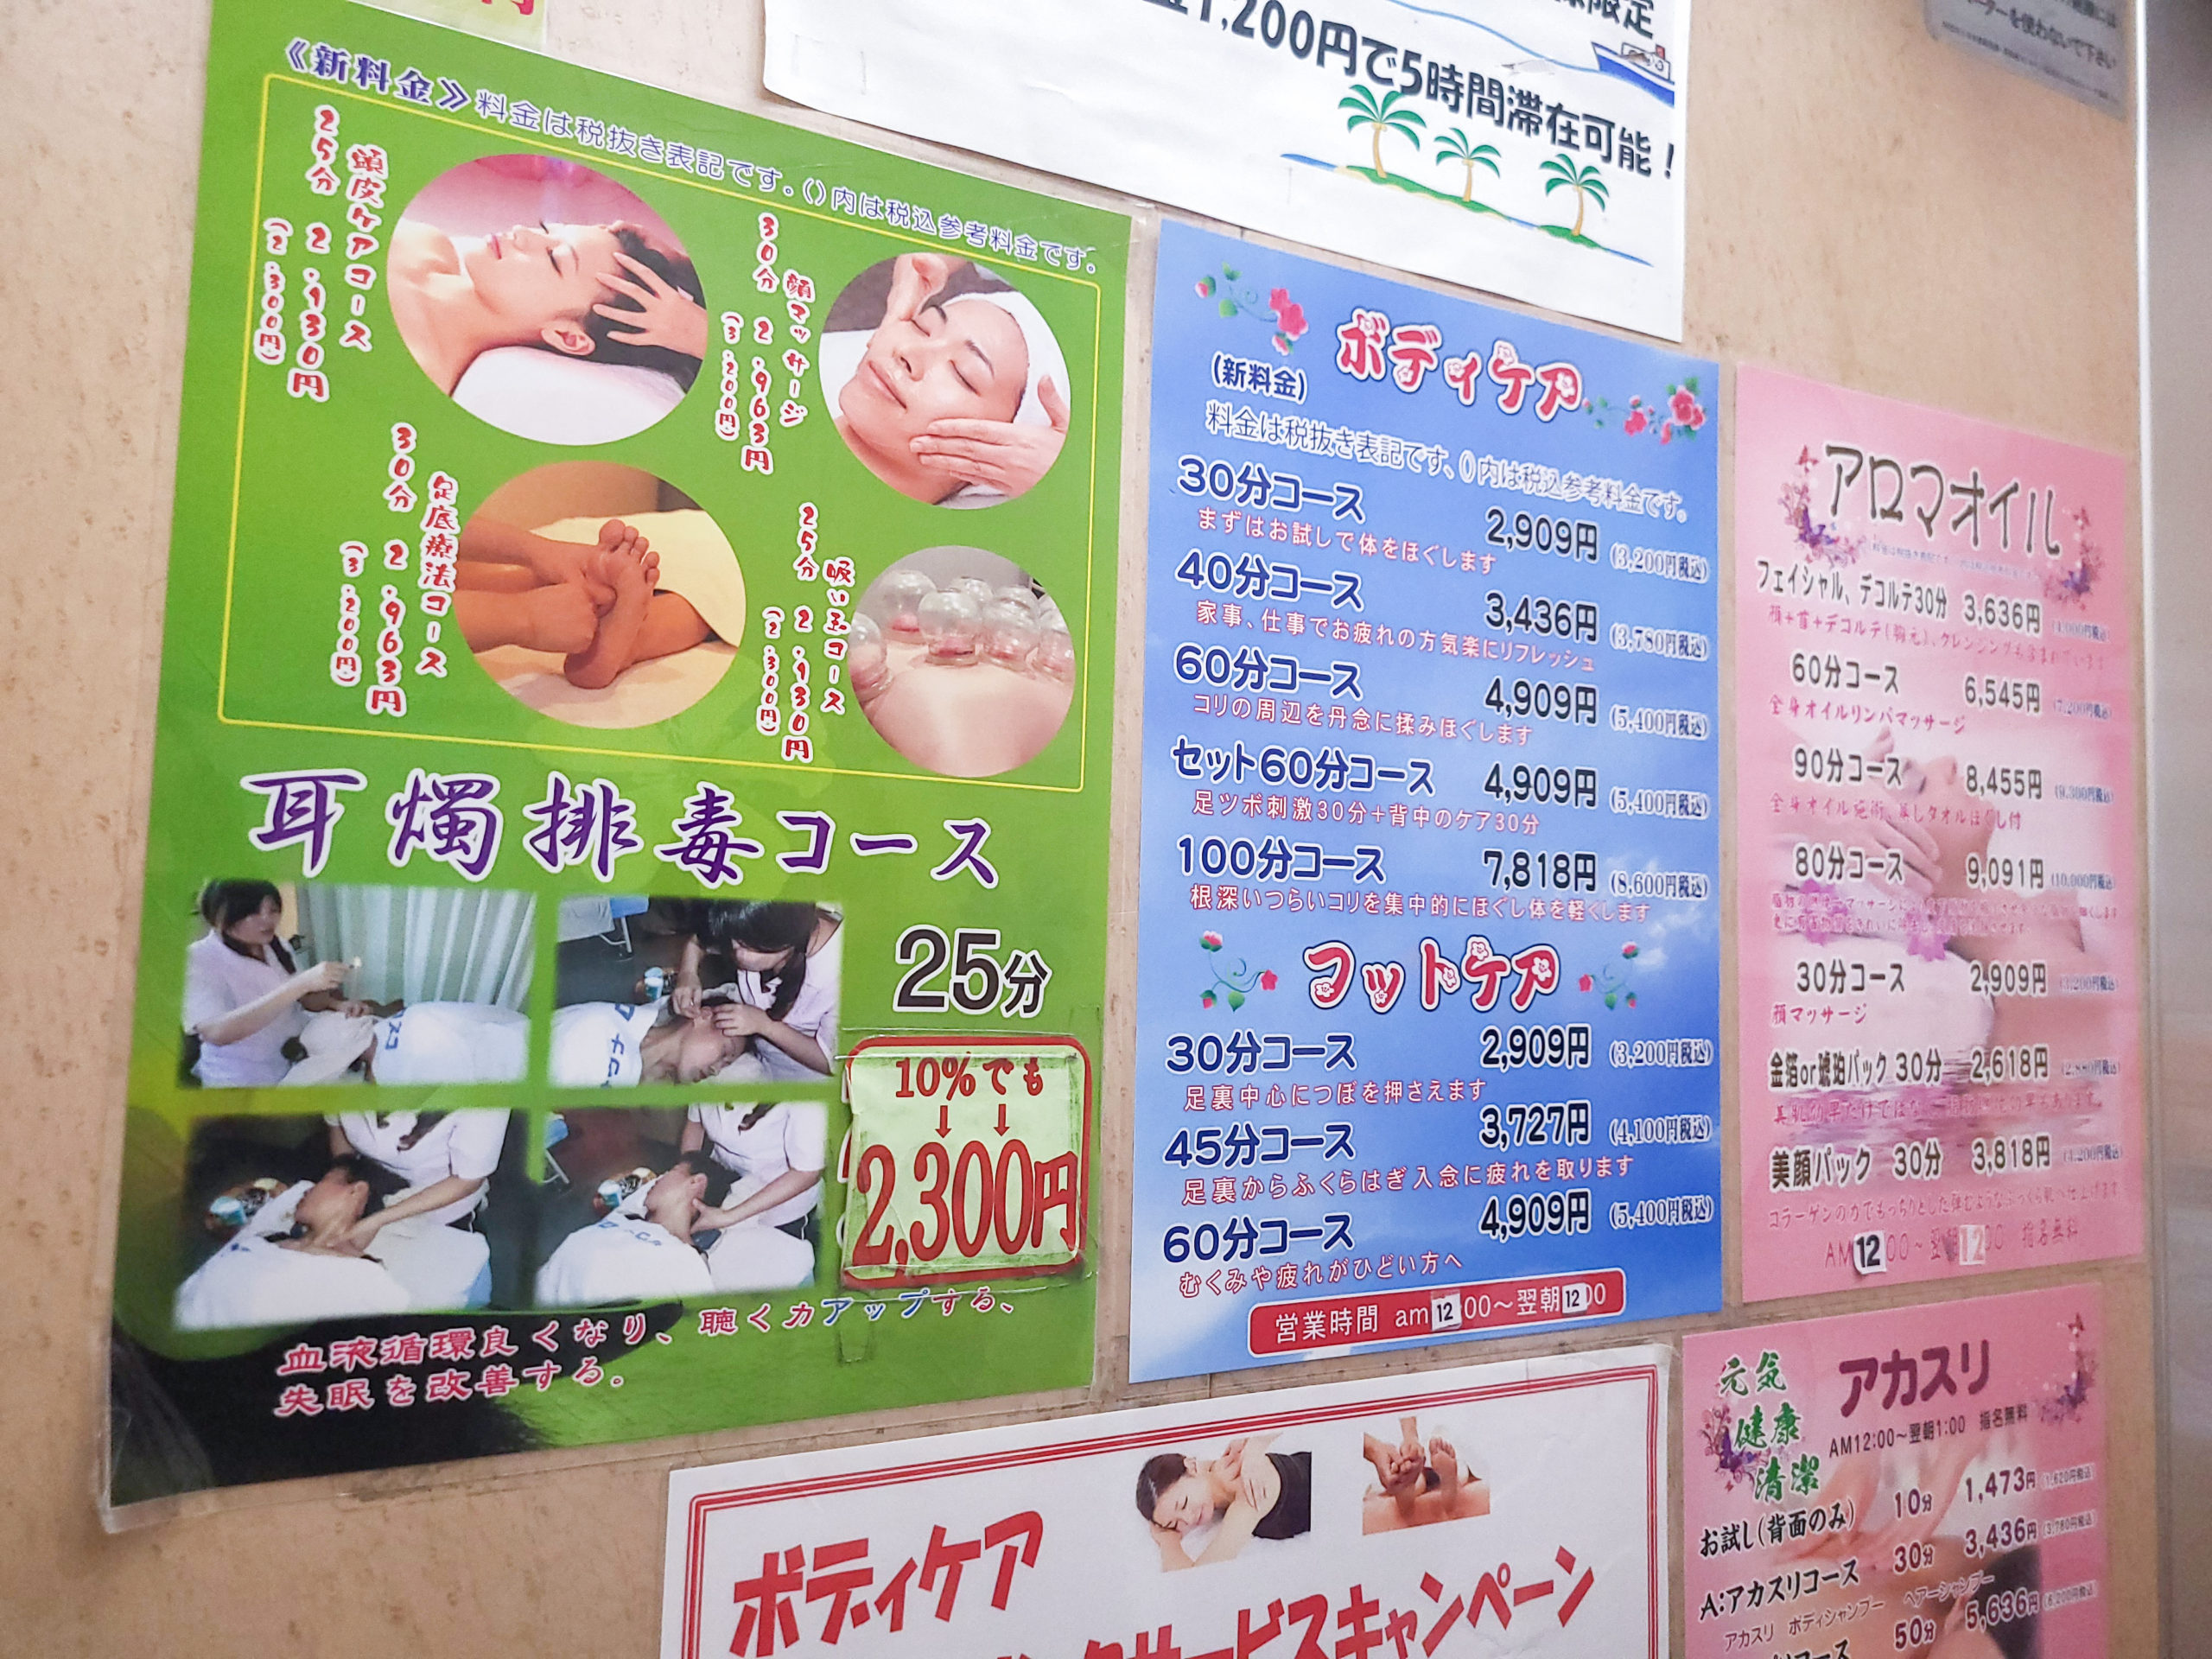 The massage and akasuri (scrub) menu offers tons of options to choose from